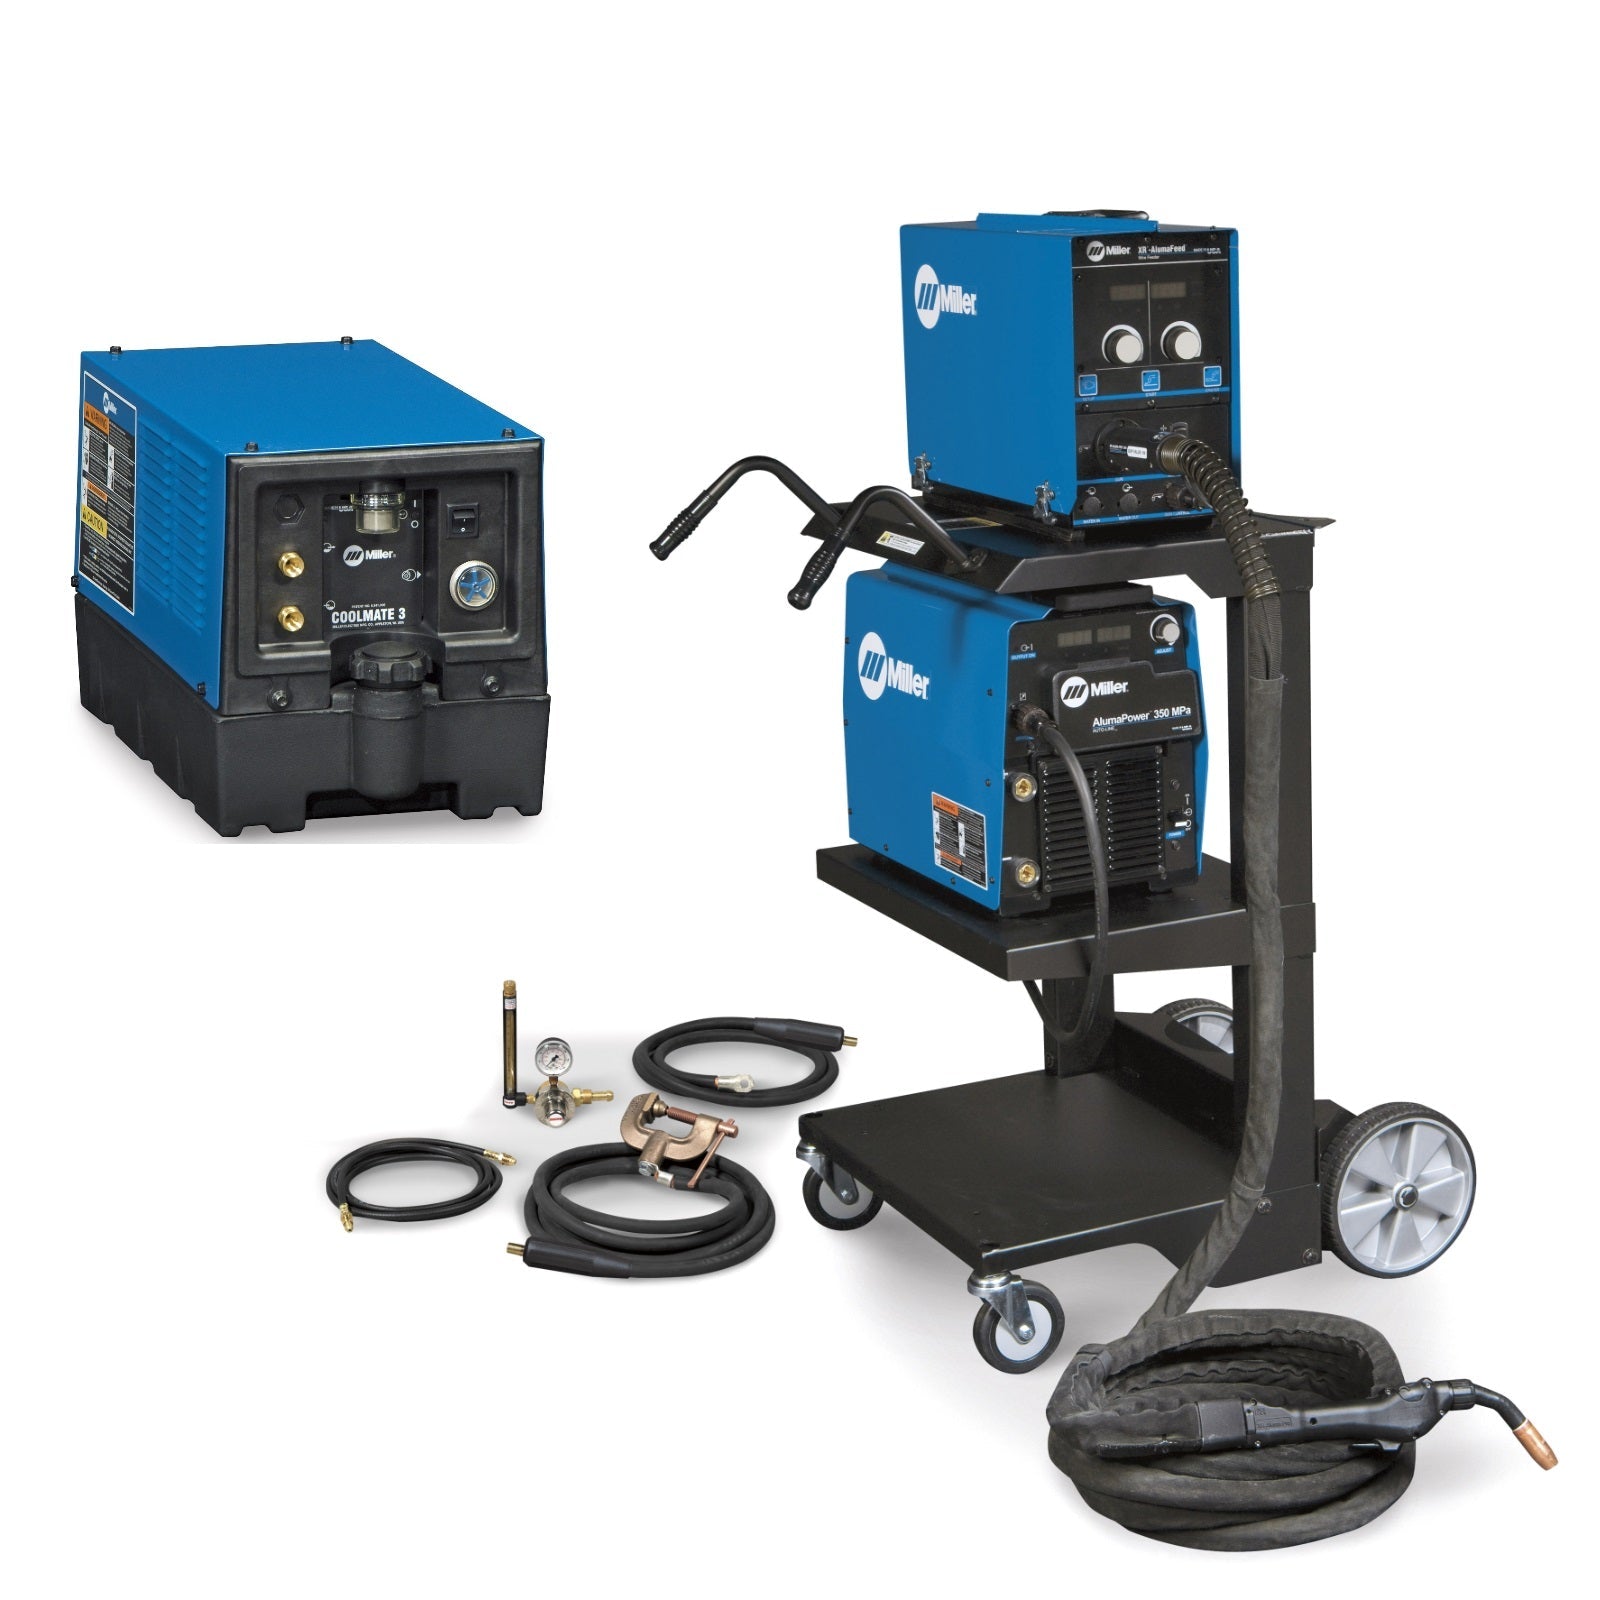 Miller AlumaPower 450 MPa MIG Welder with Aux Power, Accessory Package and Cart (951559)